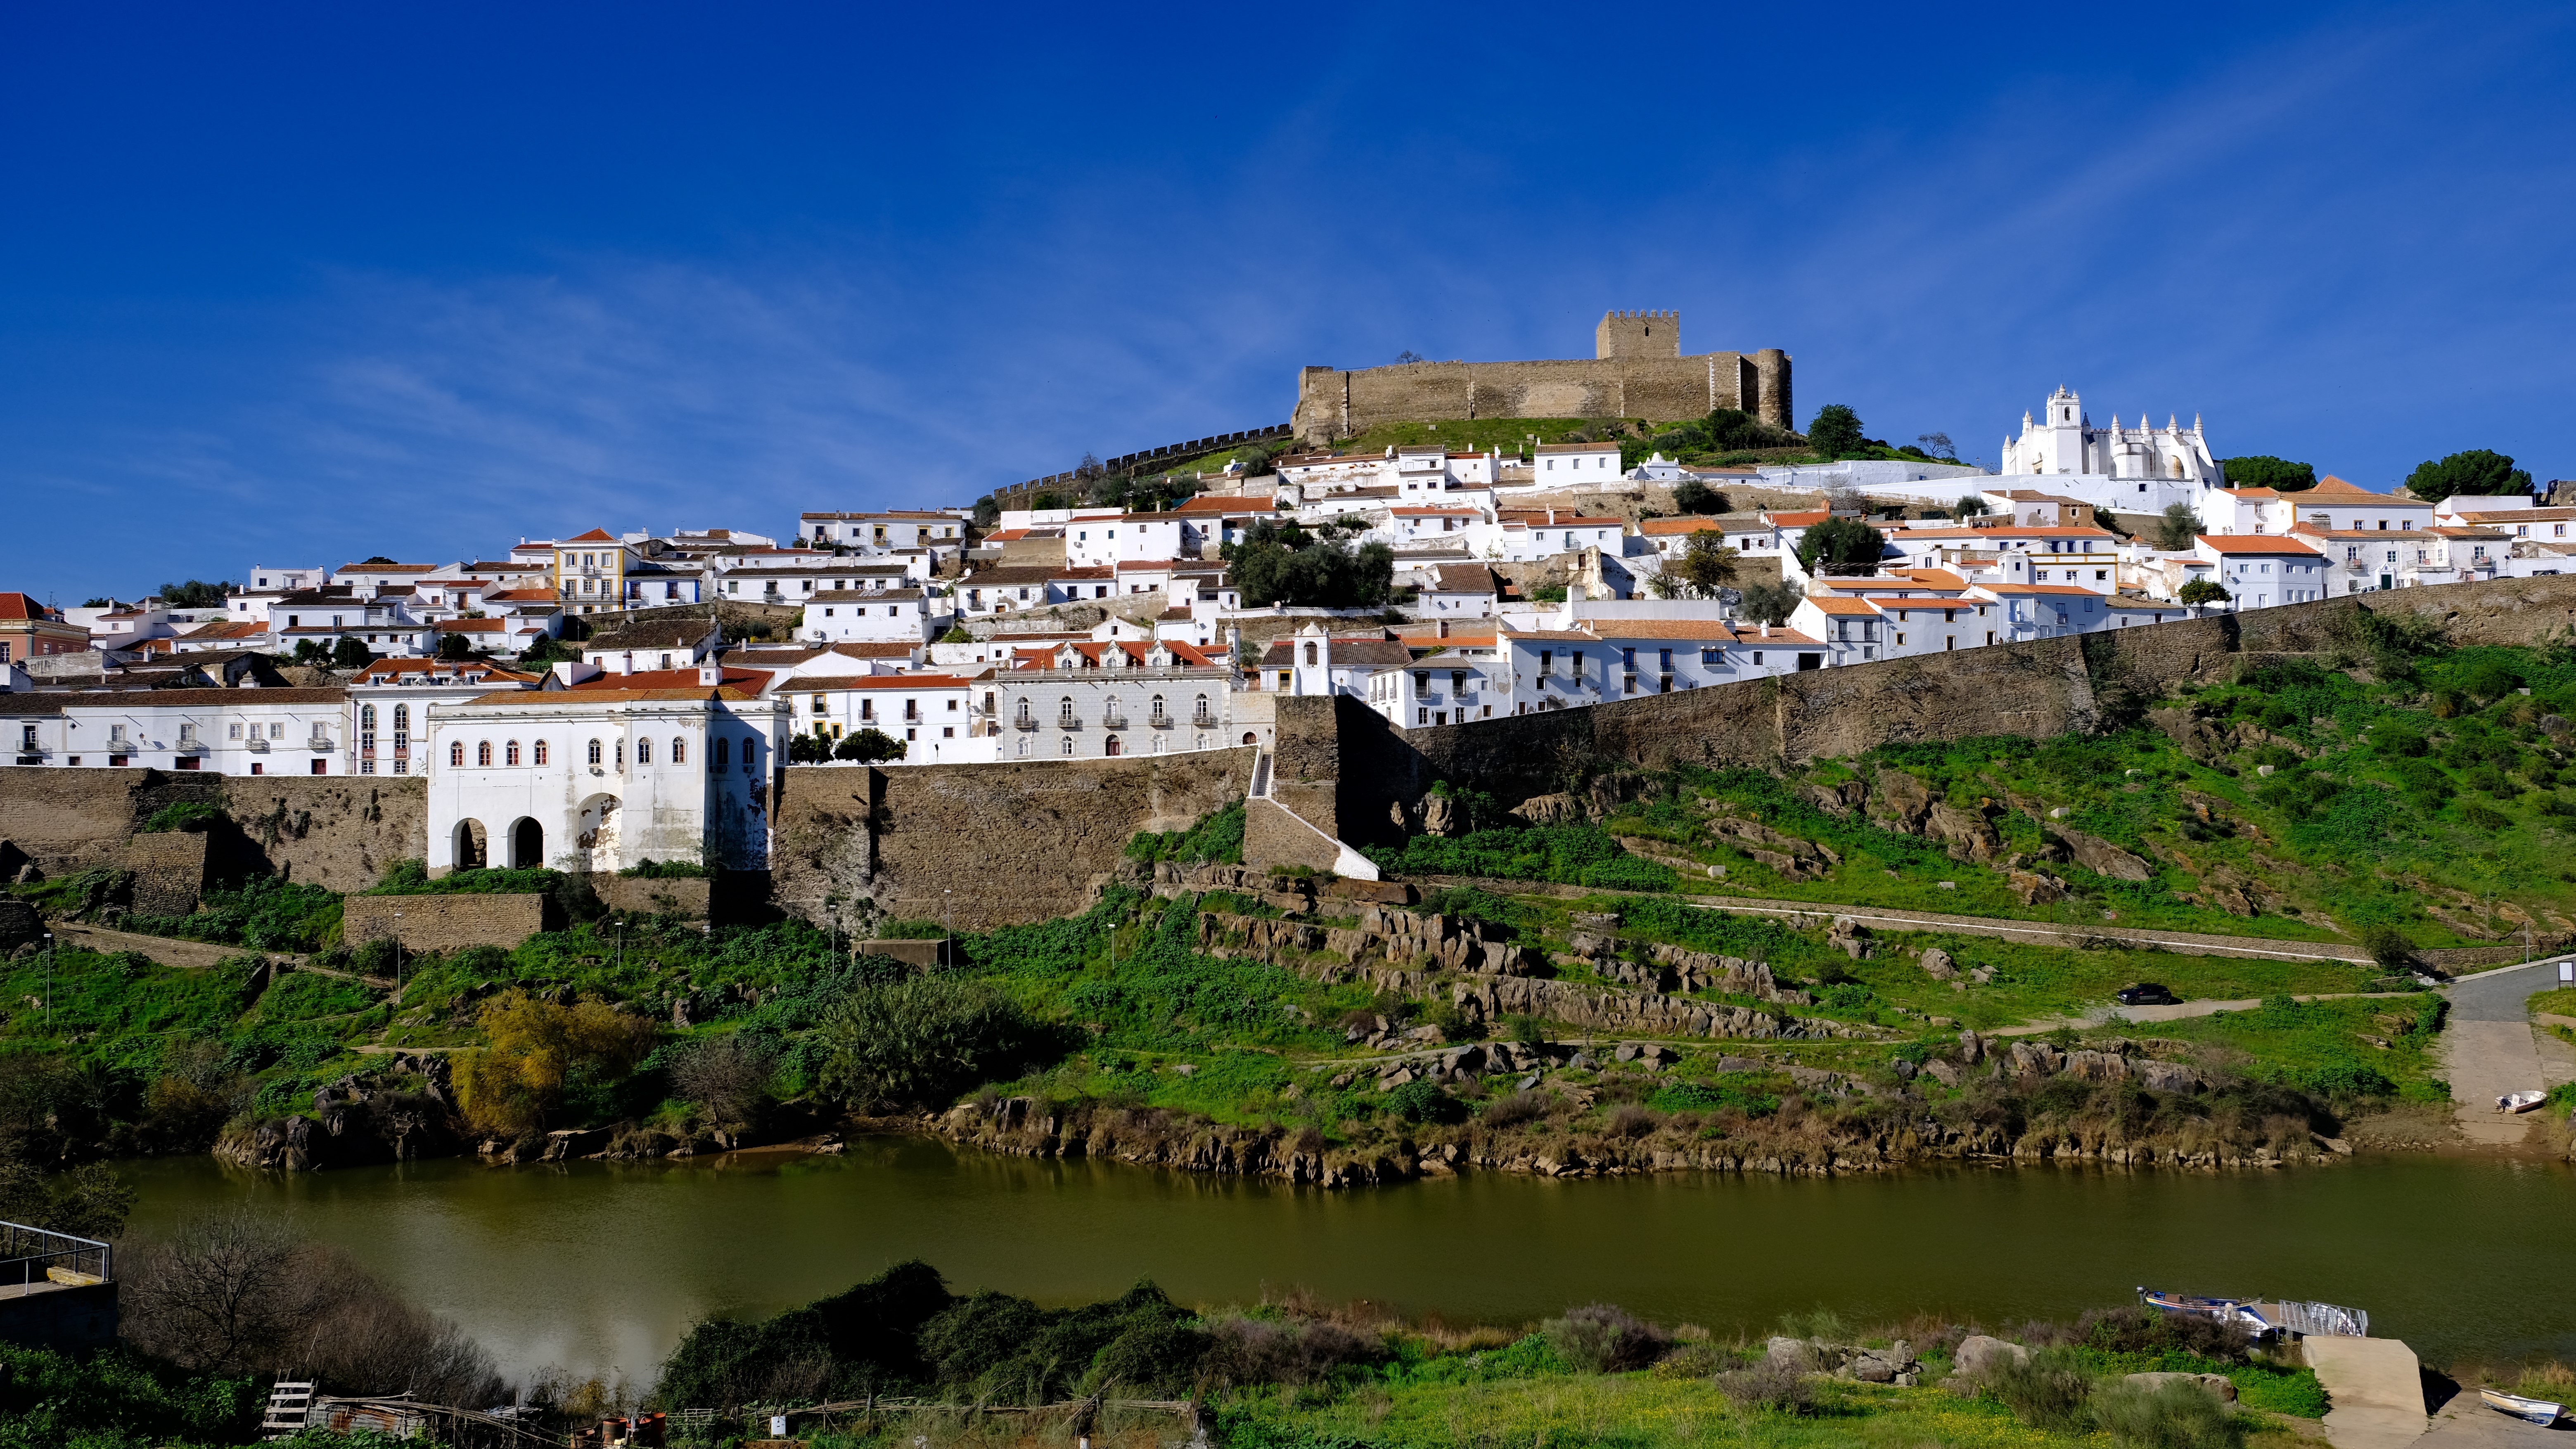 Mertola, a small town in southern Portugal famous for its Islamic heritage (image: Marta Vidal)